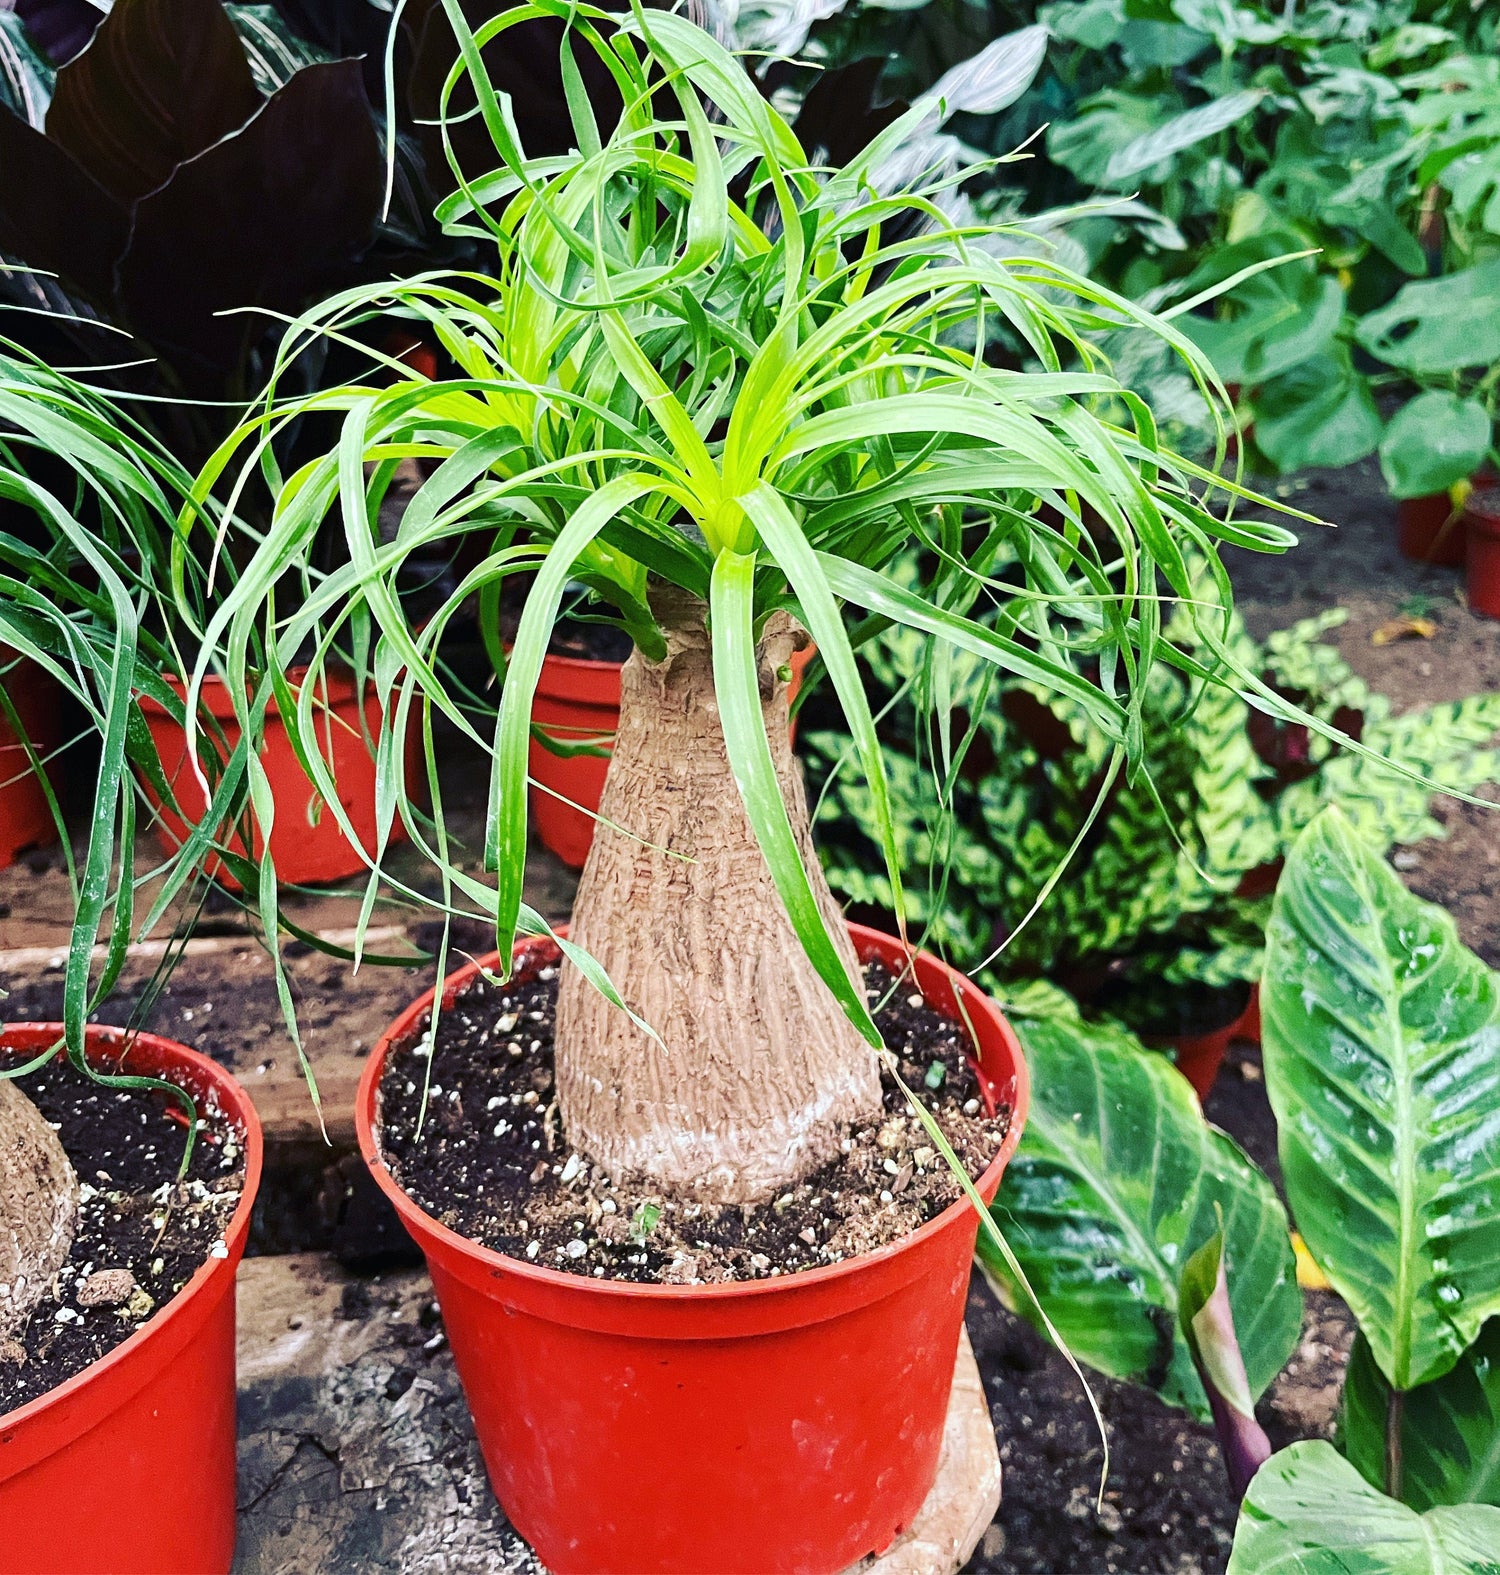 Pony Tail Palm - great for bonsai project -indoor or outdoor -low maintenance easy care-Beaucarnea recurvata -elephant foot palm